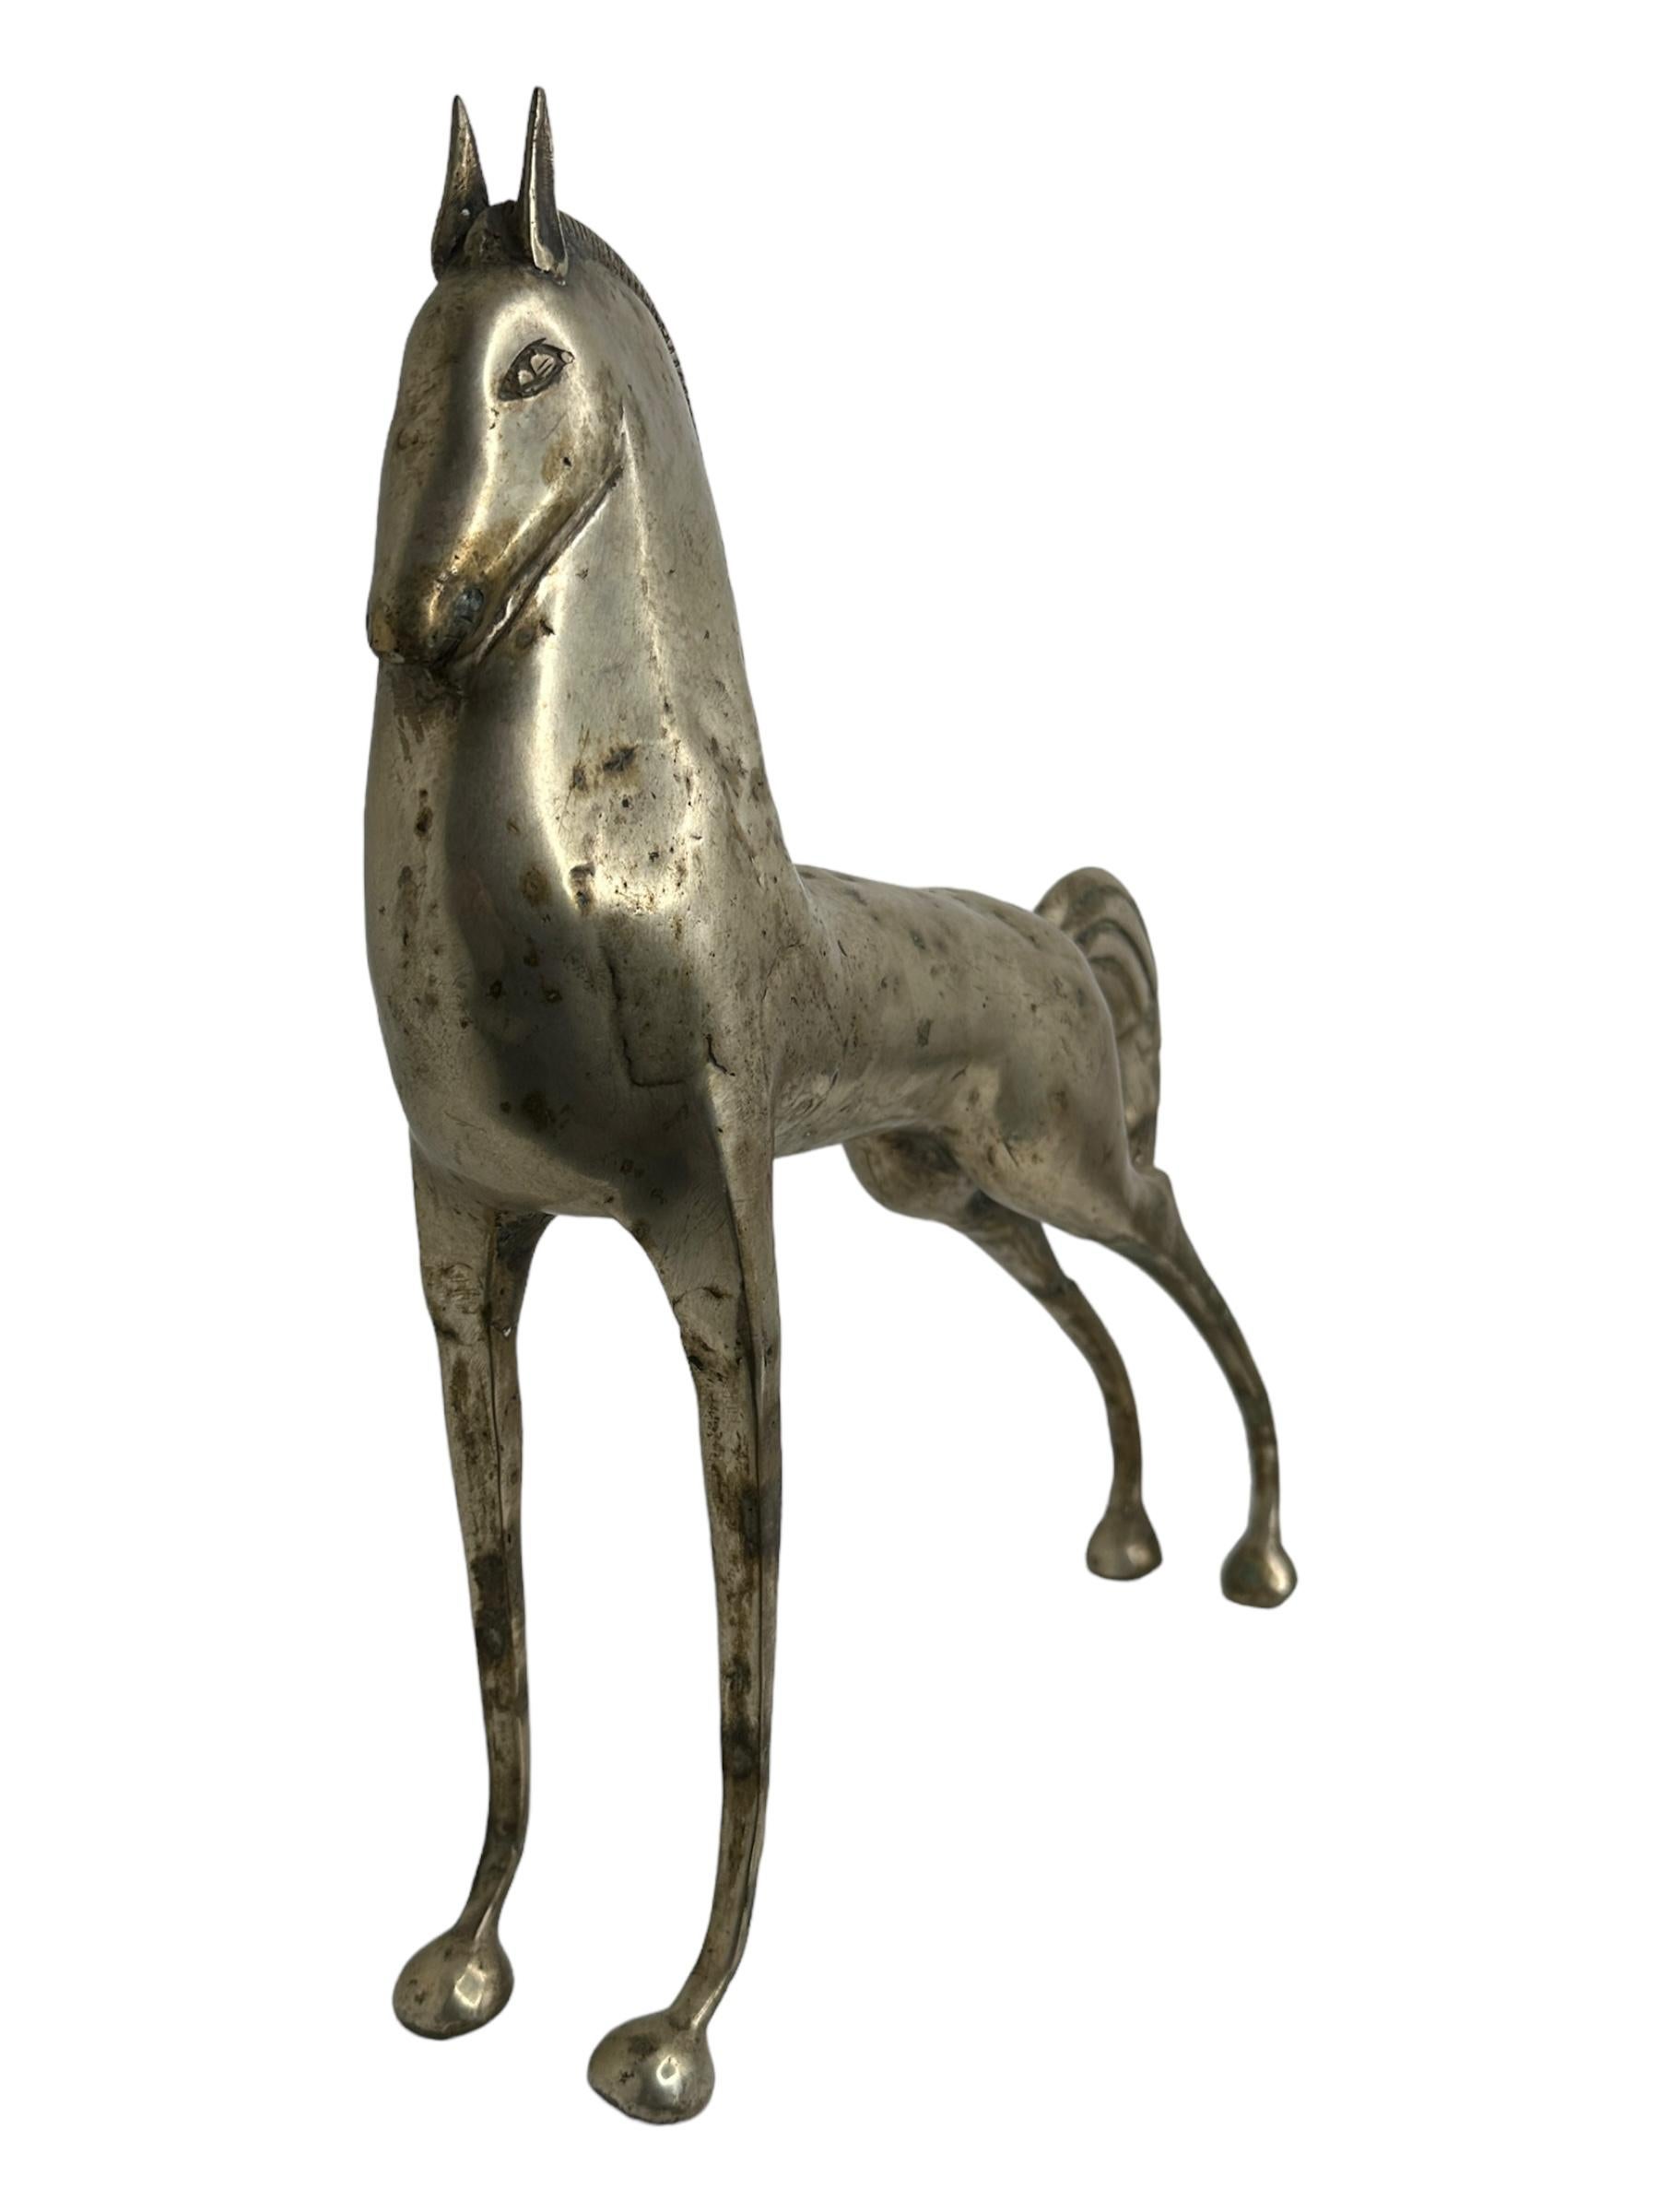 This is a nickel plated metal sculpture, in the style of the antique statues and figures of the Etruscans. It is a gorgeous interior furnishing item, an incredibly stylized Horse and has a patina finish. probably Italian-made and great for any